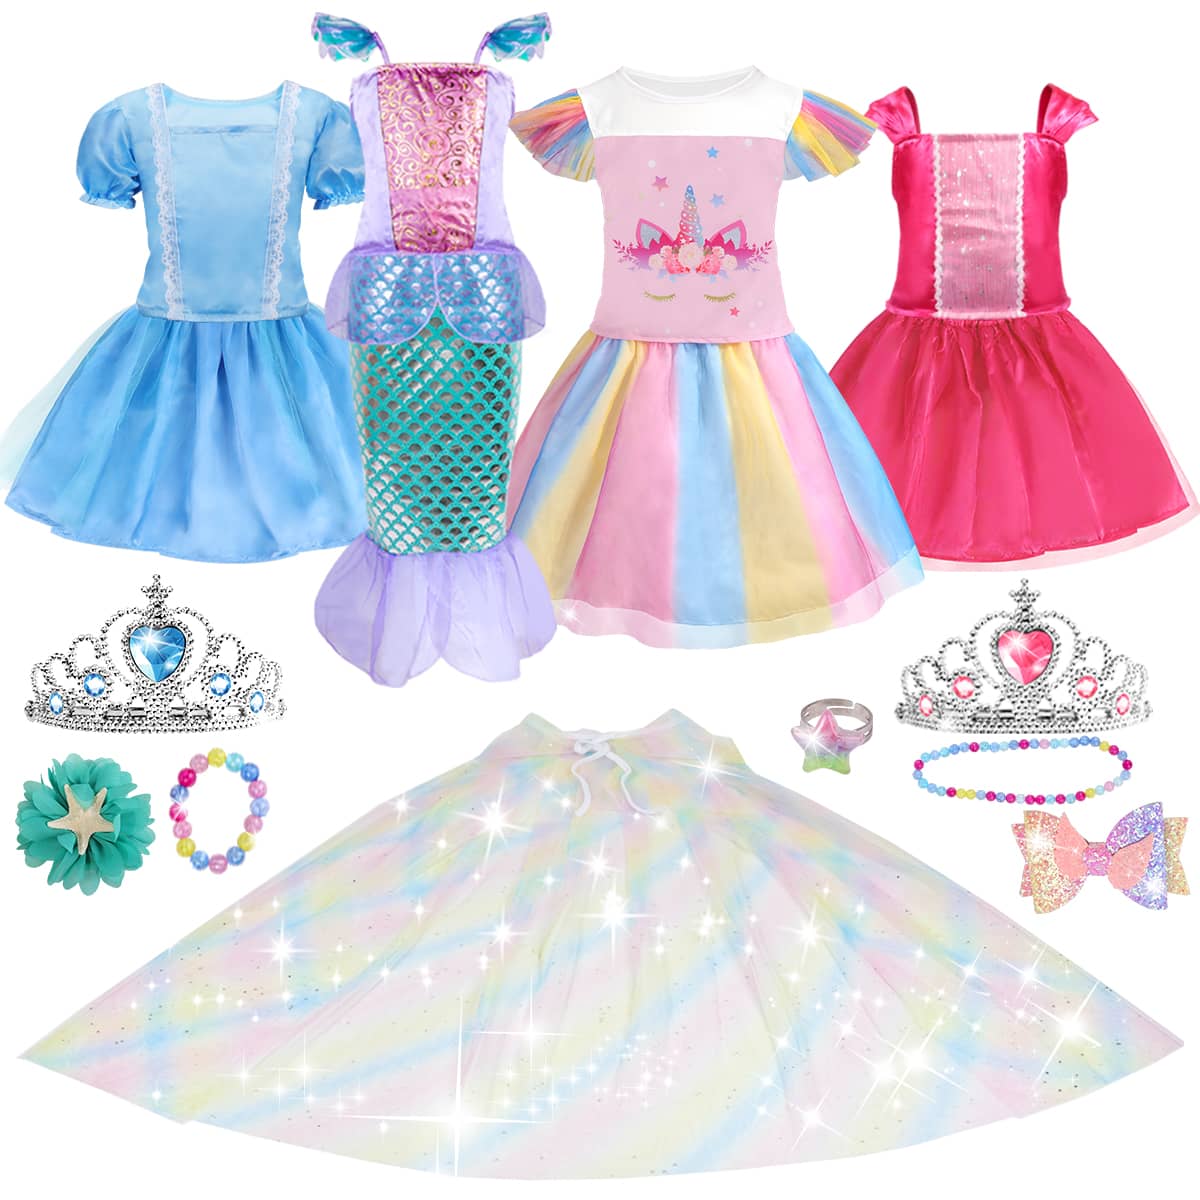 dress up clothes for girls